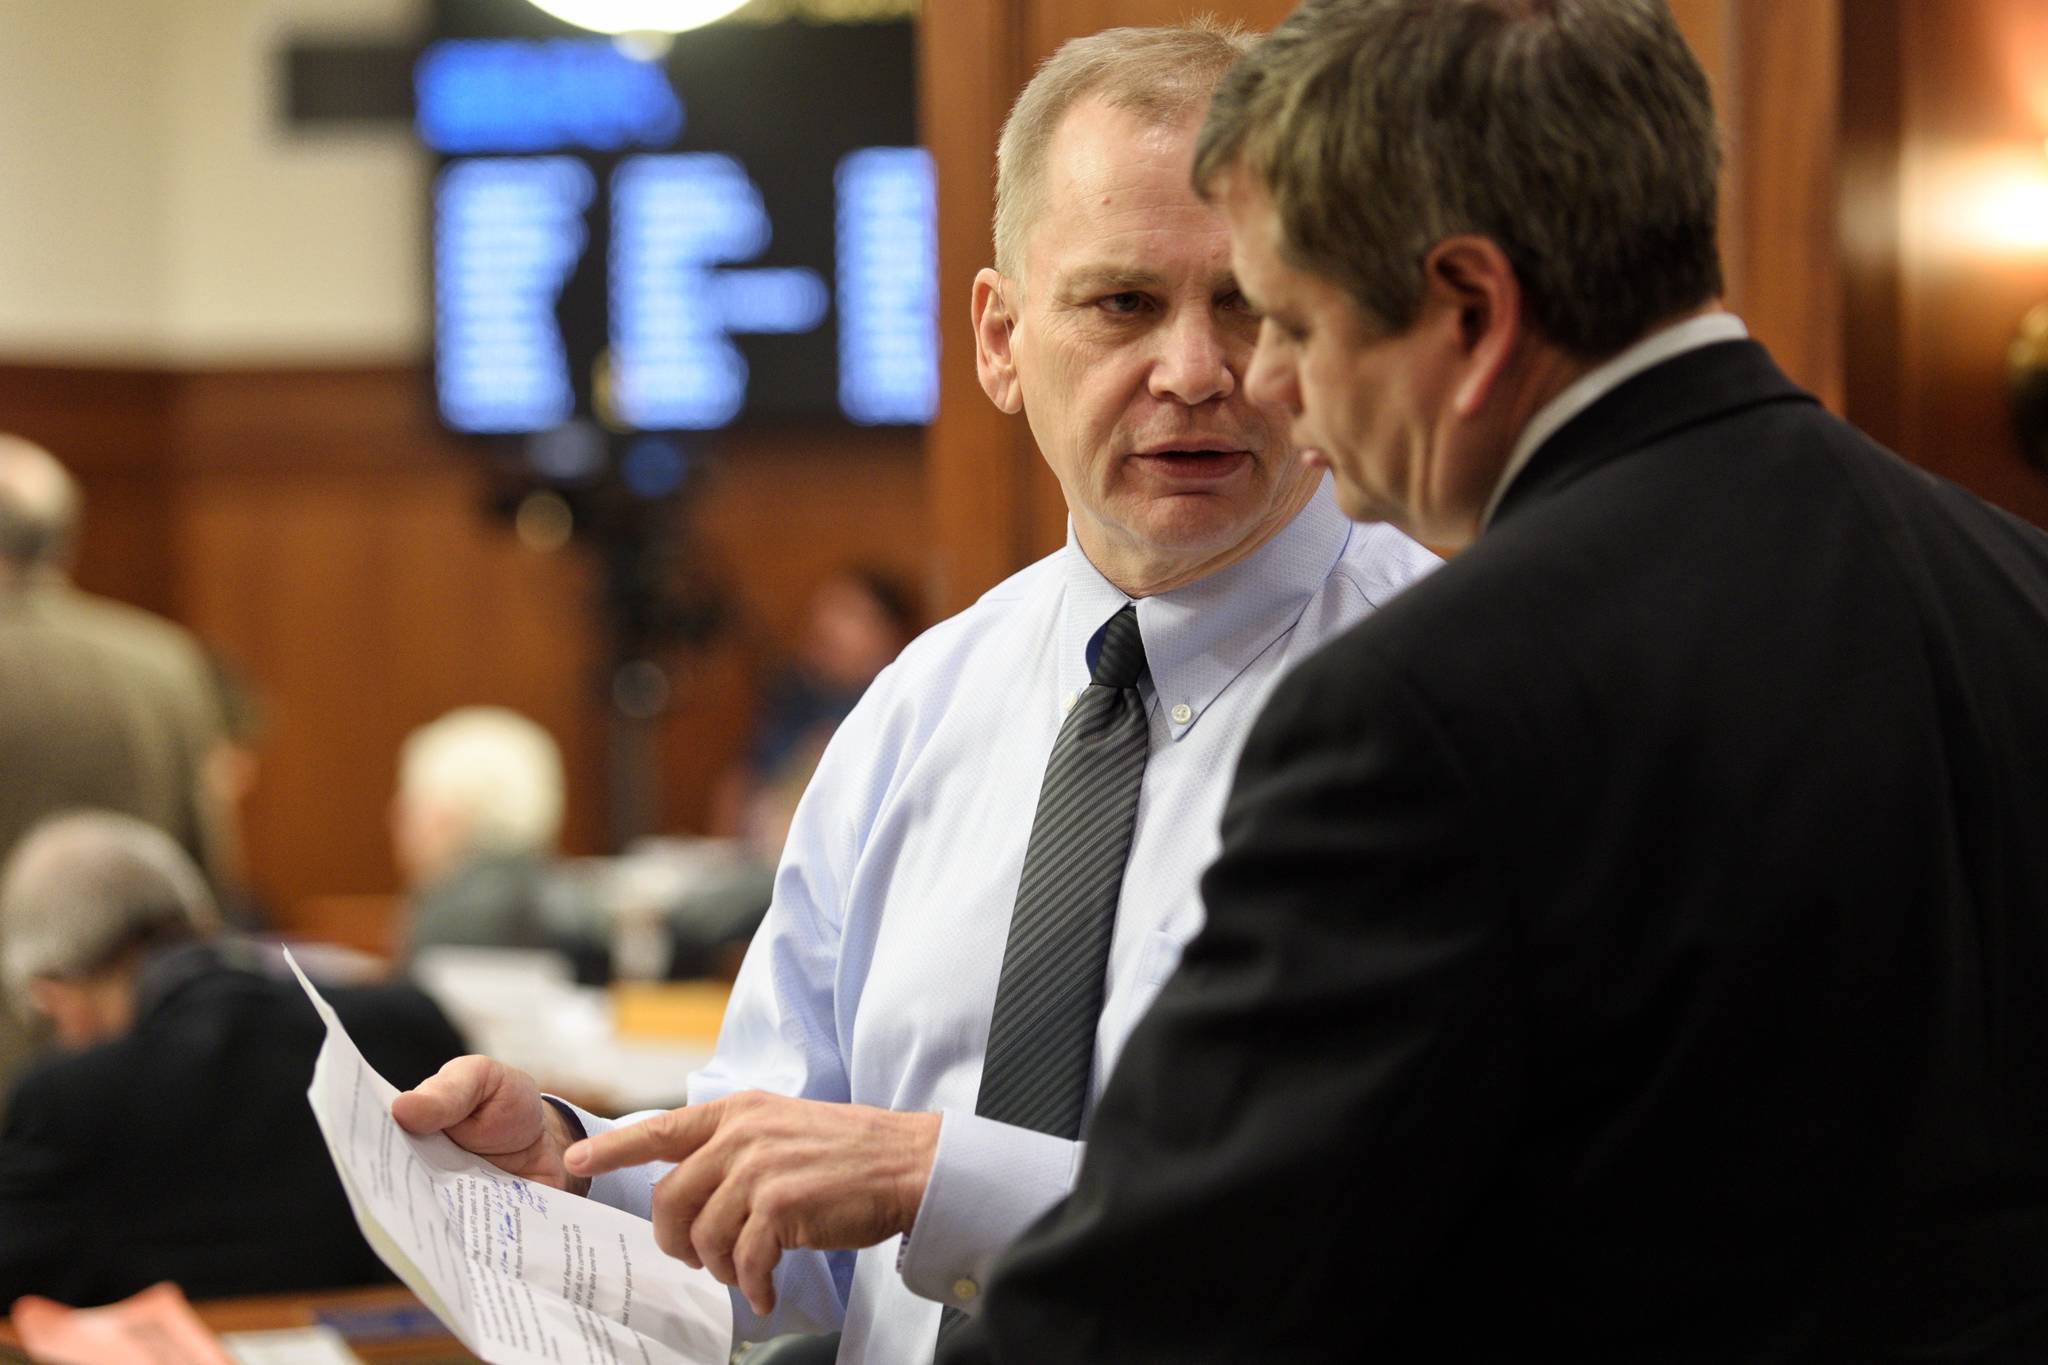 Rep. Mark Neuman, R-Big Lake, left, speaks with Rep. Chris Tuck, D-Anchorage, on the House floor as amendments to the budget are proposed on Tuesday, April 9, 2019. (Michael Penn | Juneau Empire)